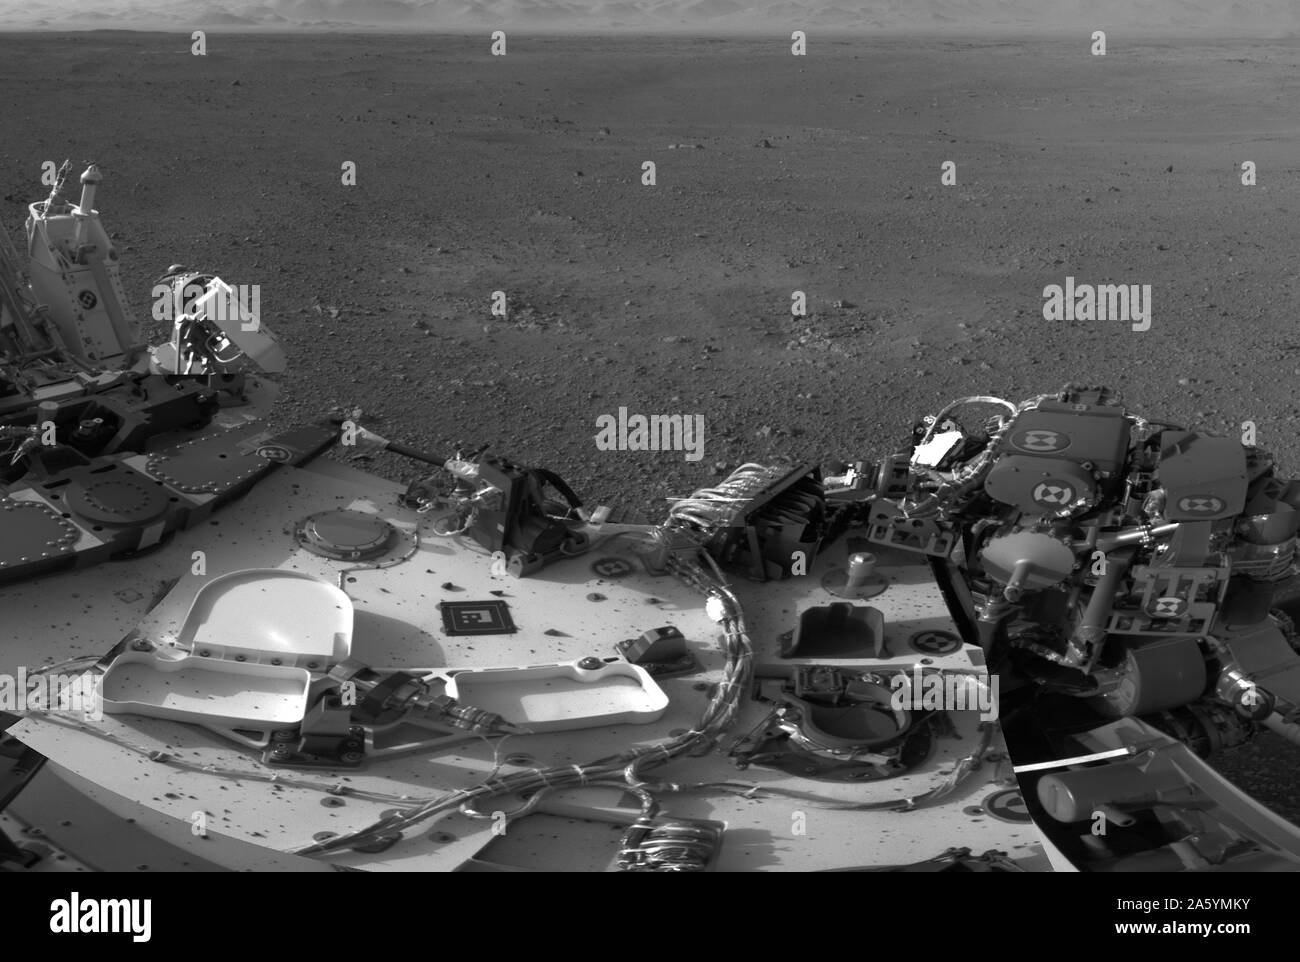 The image shows part of the deck of NASA's Curiosity rover taken from one of the rover's Navigation cameras looking toward the back left of the rover. Stock Photo